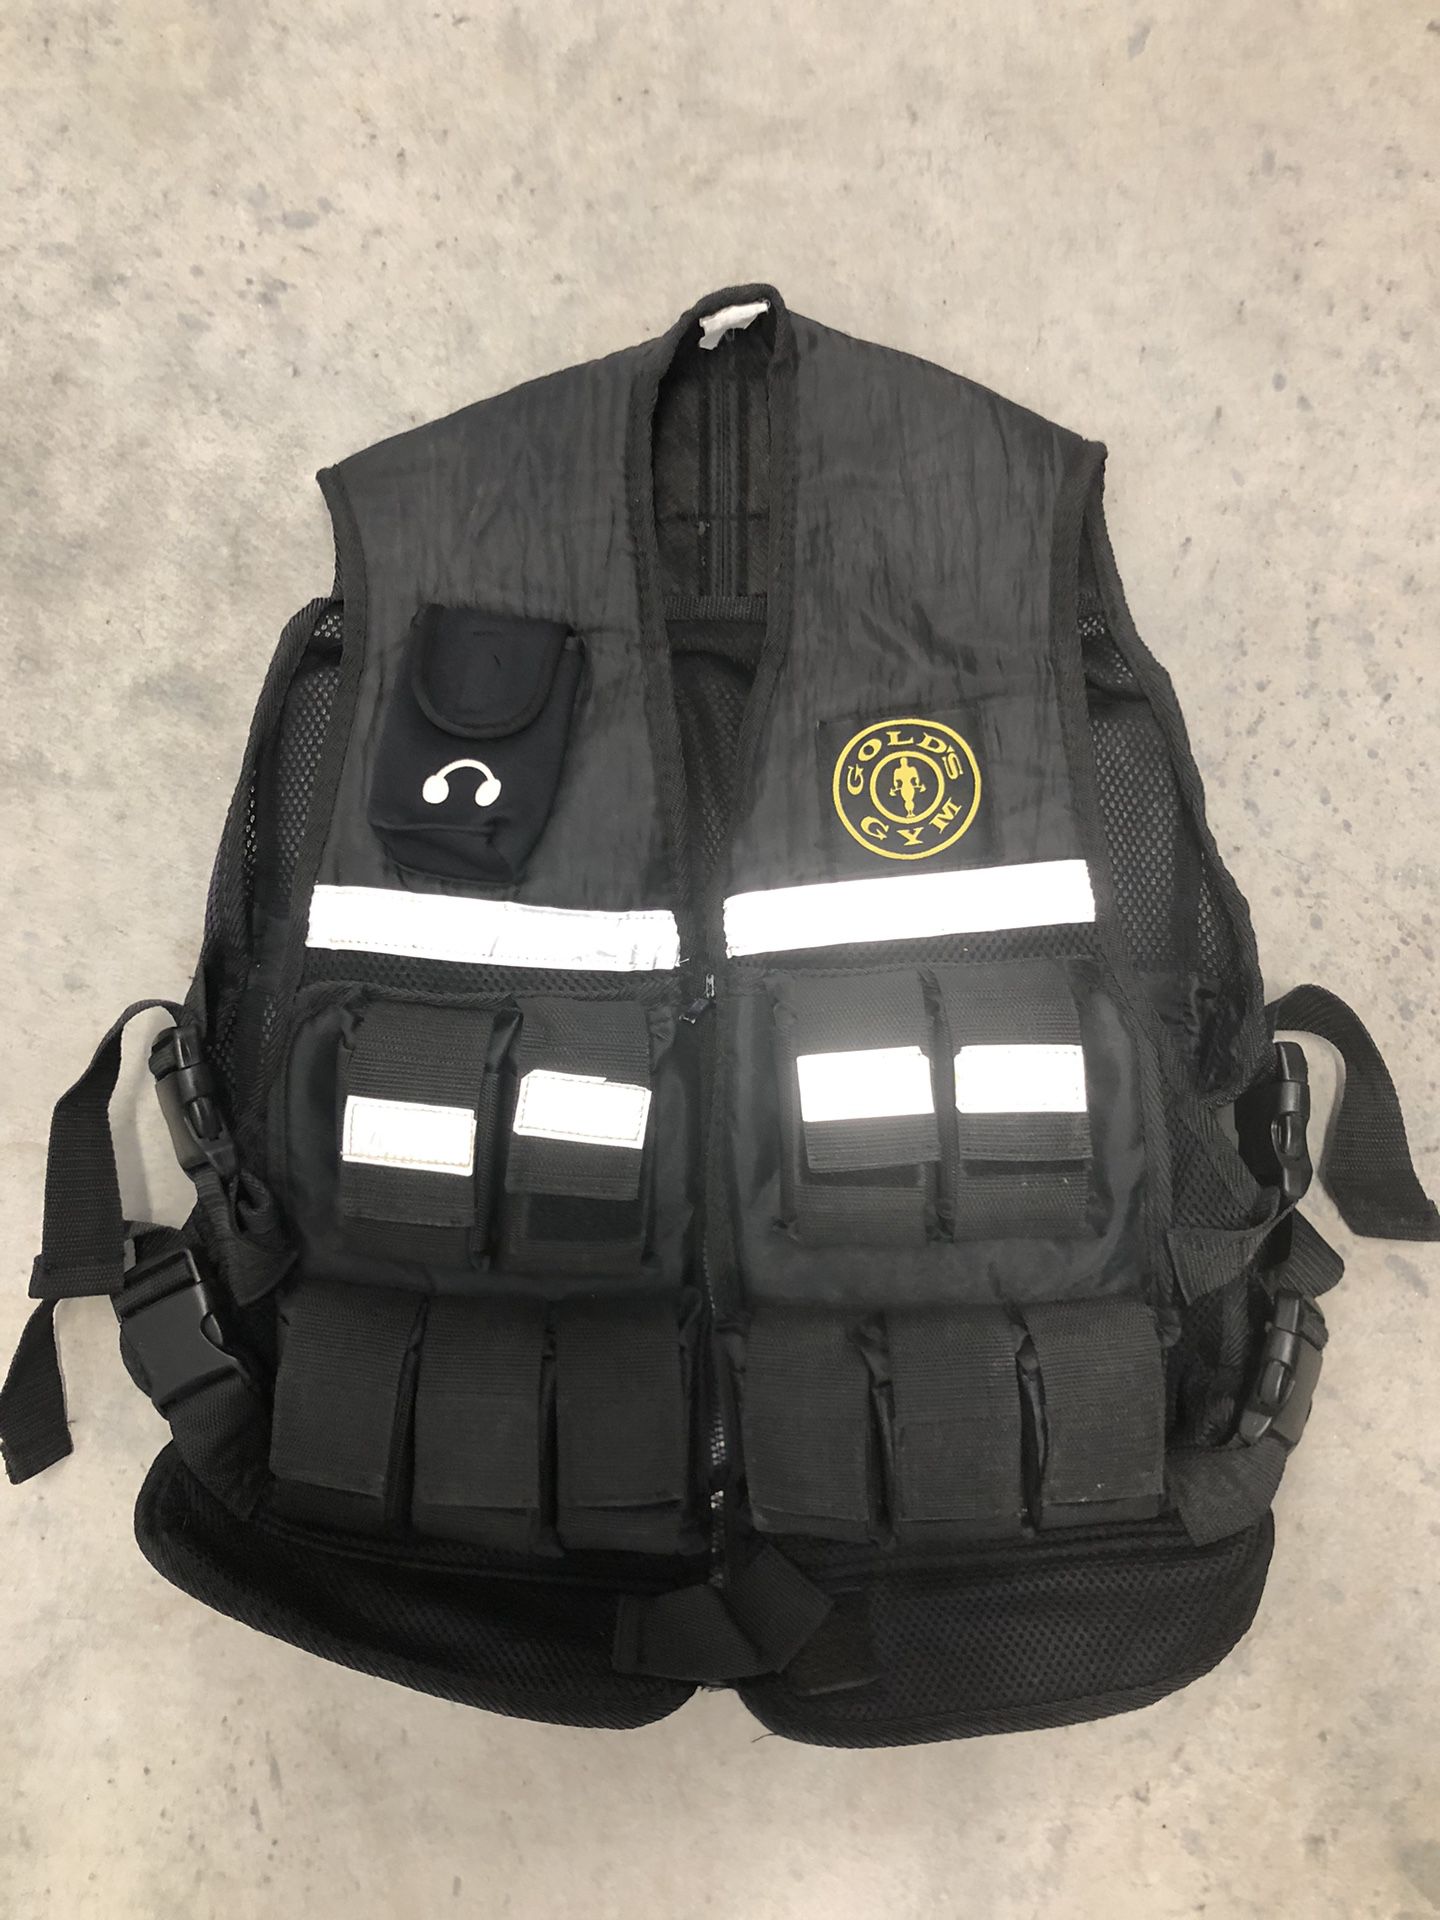 Gold gym Weighted Vest 